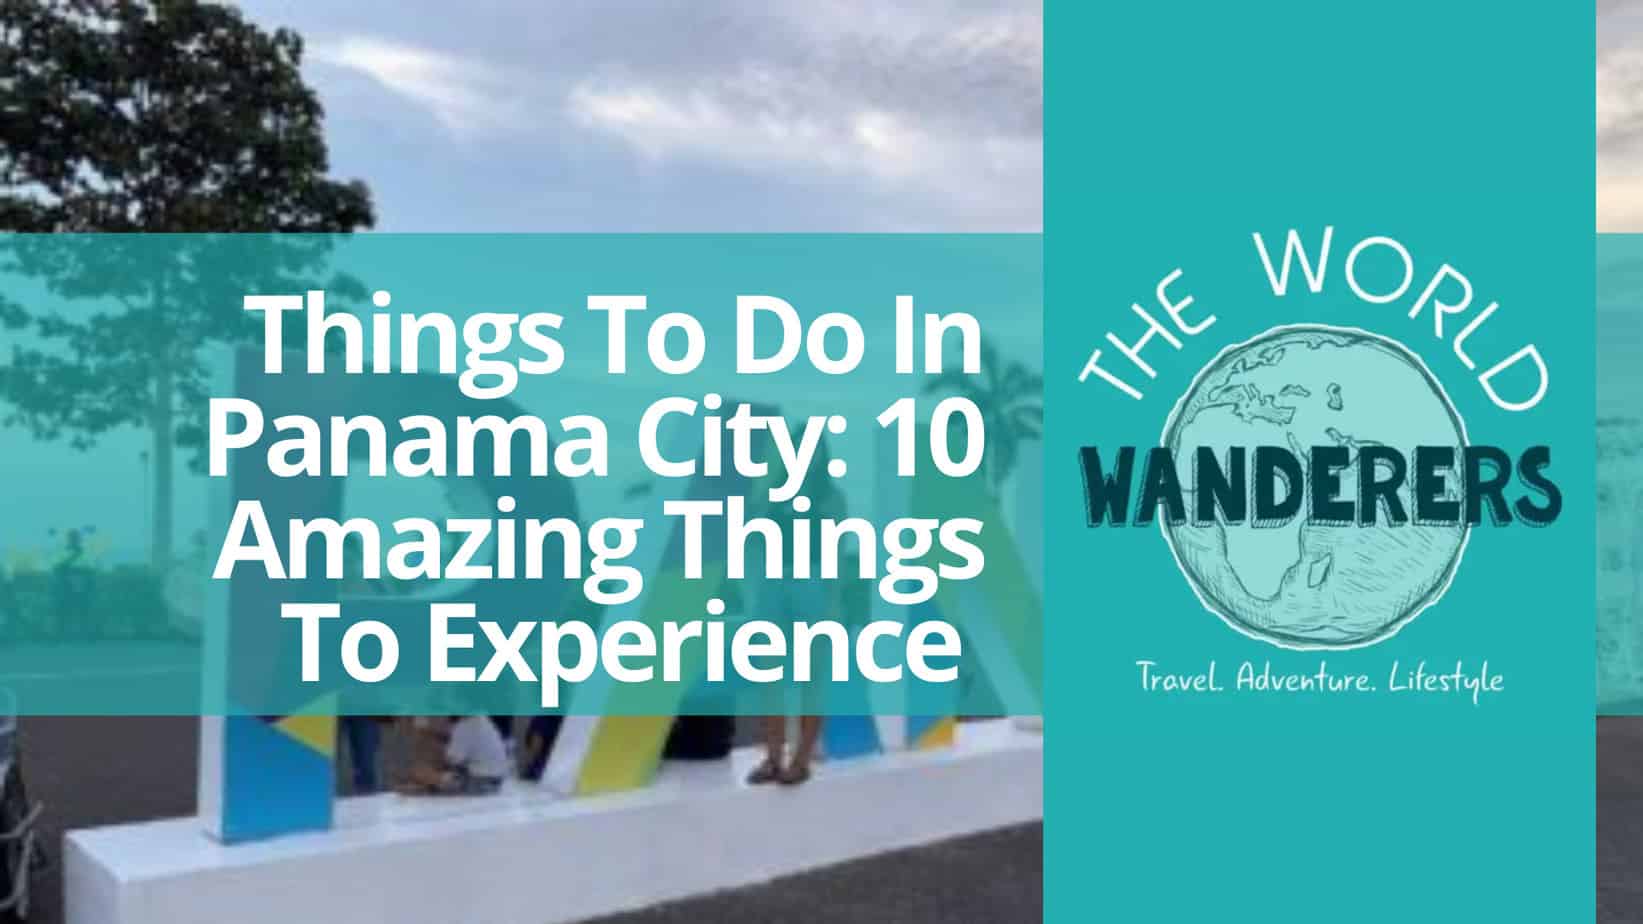 Things To Do In Panama City 10 Amazing Things To Experience